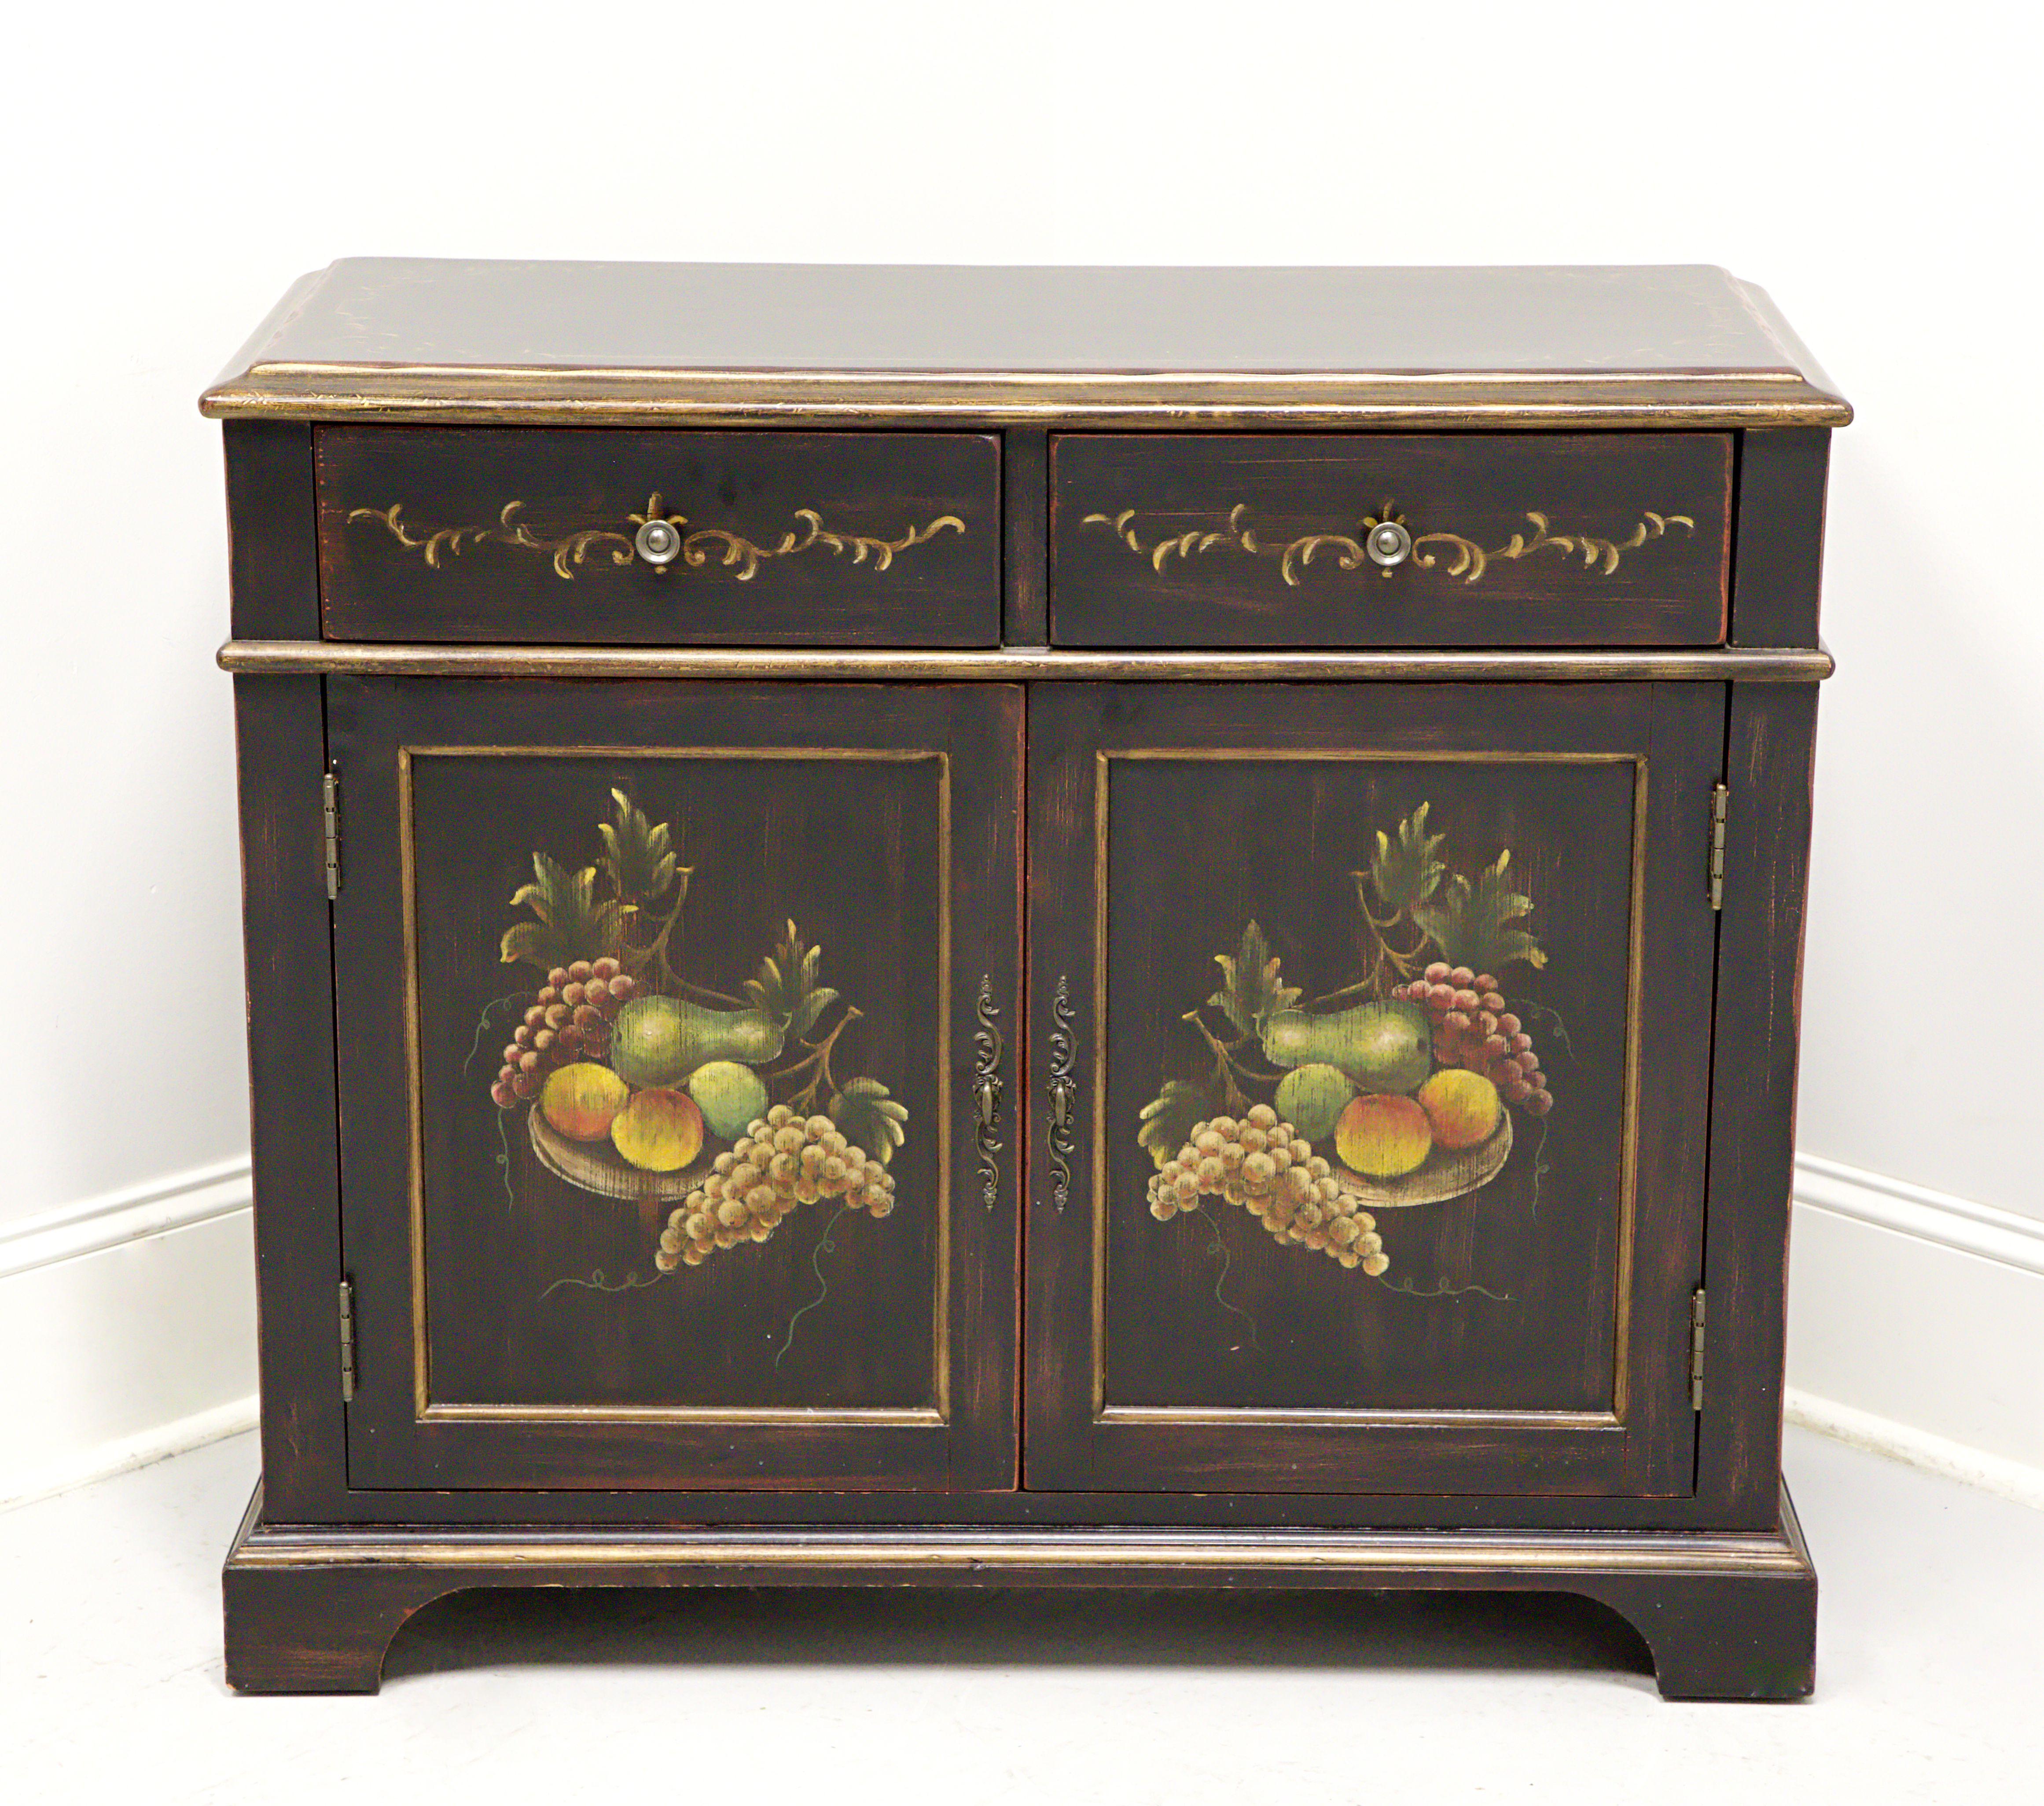 A French Country style console cabinet, unbranded, similar quality to Pulaski or Thomasville. Solid hardwood painted black with distressing, brass hardware, hand painted gold ornamentation to top, drawers & sides, hand painted fruit motif to door